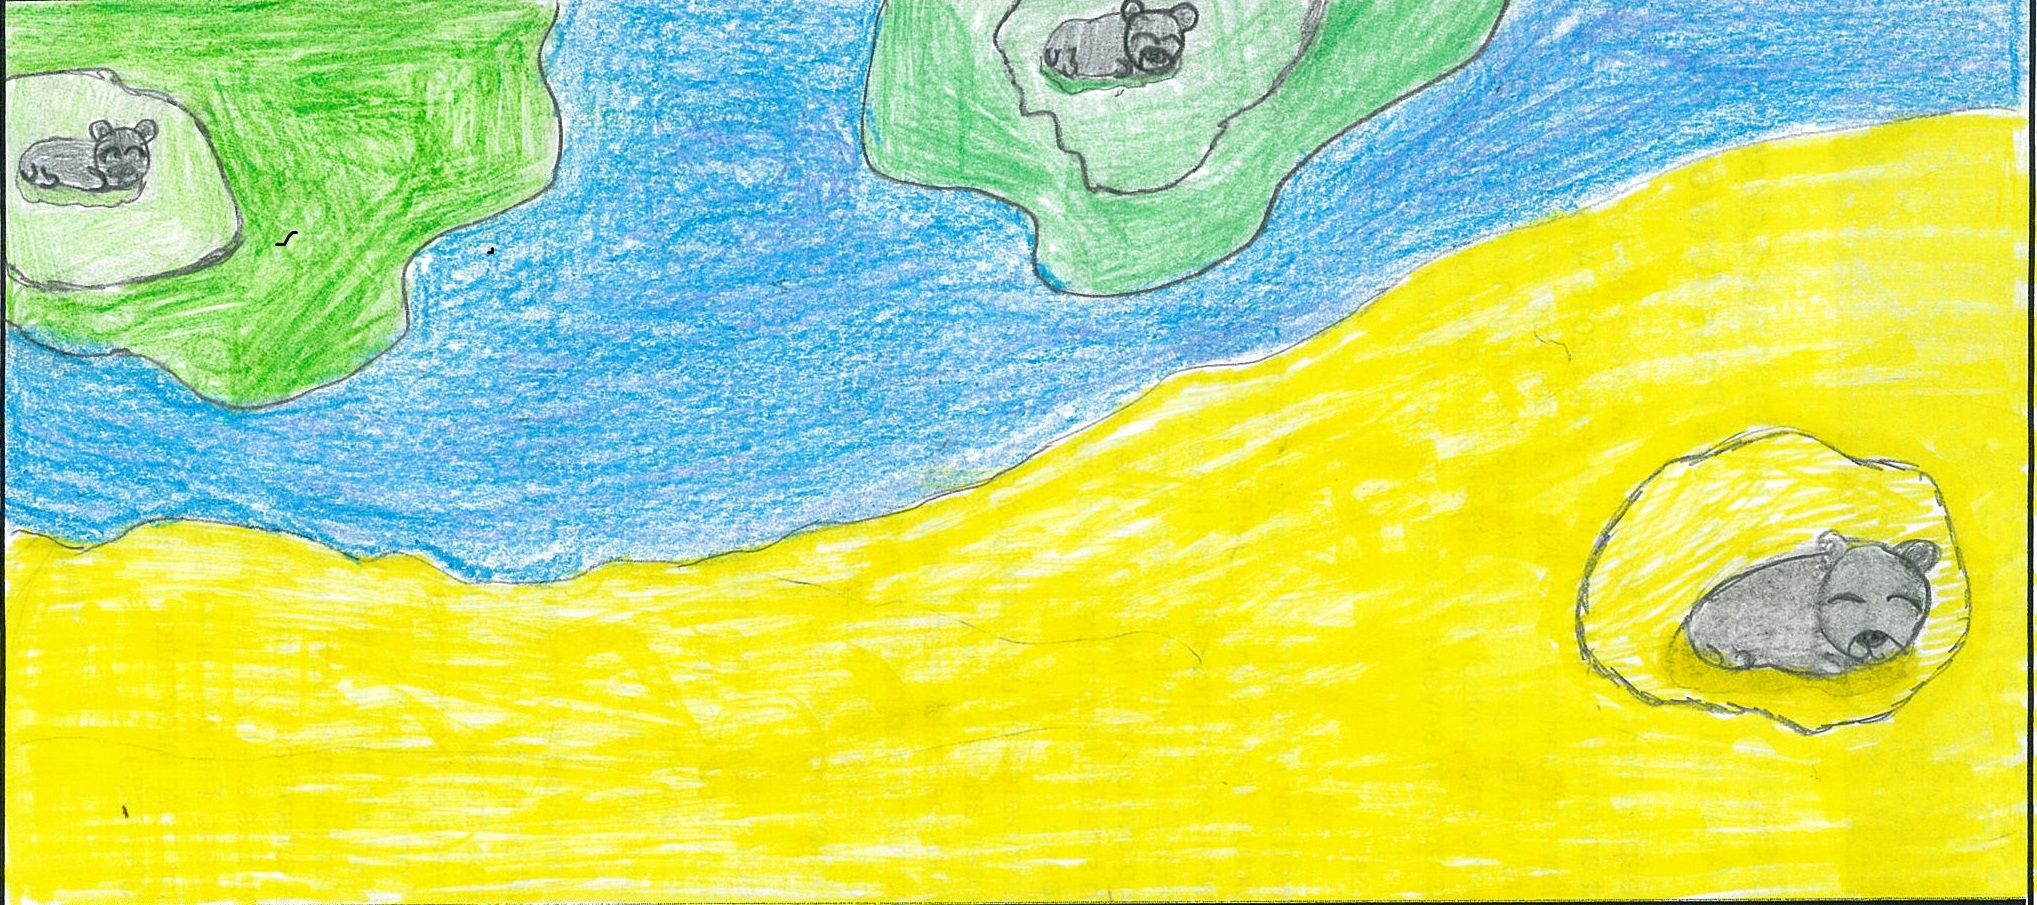 Child's drawing of sleeping bear and cubs on mainland and islands